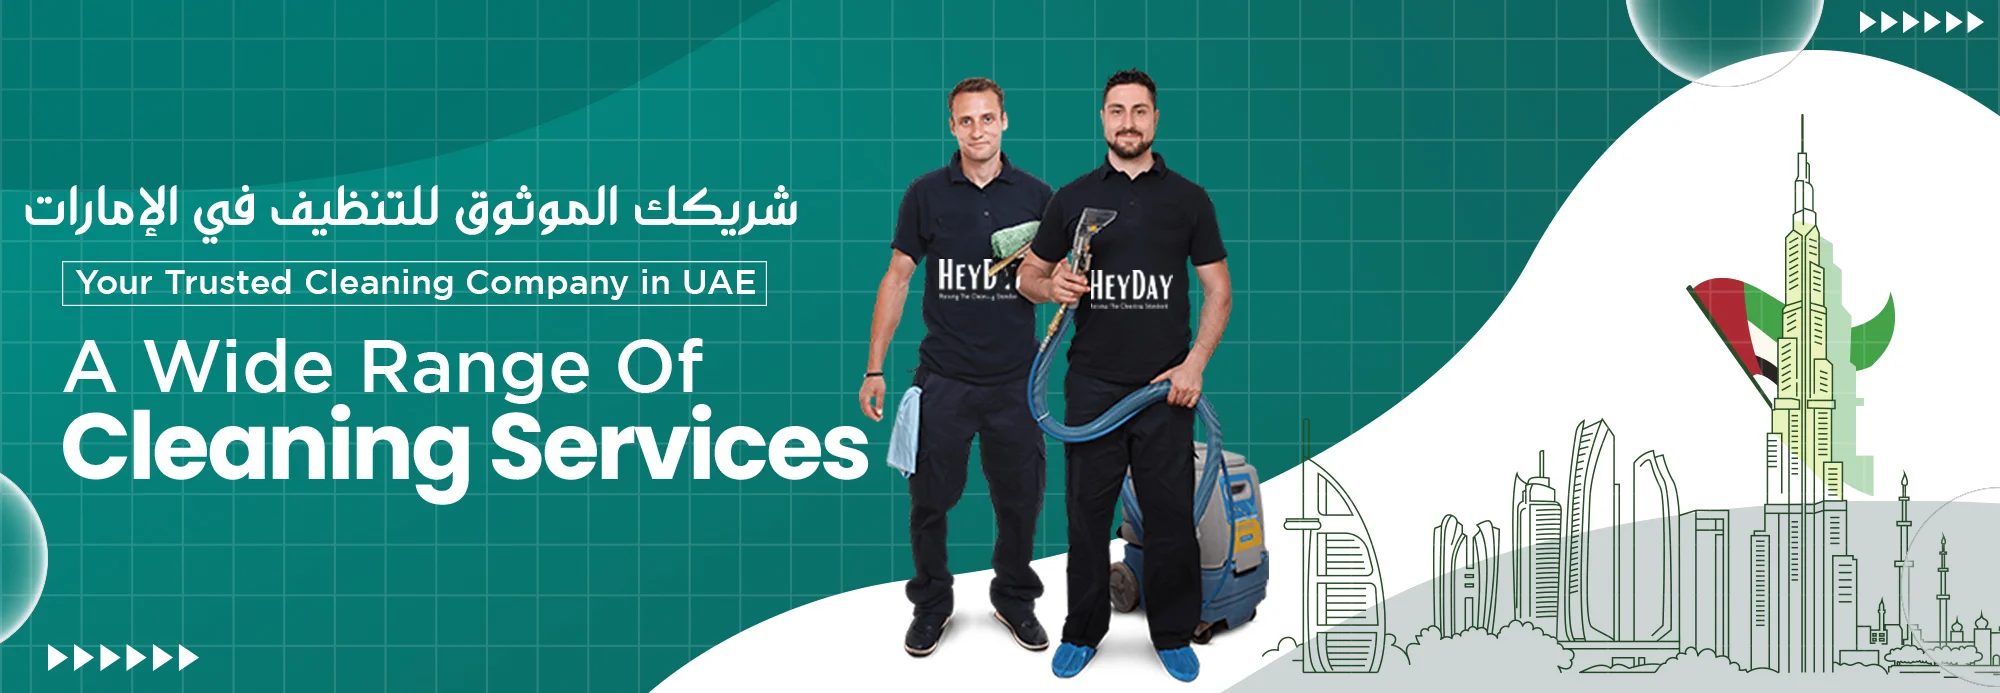 heyday cleaning service in dubai